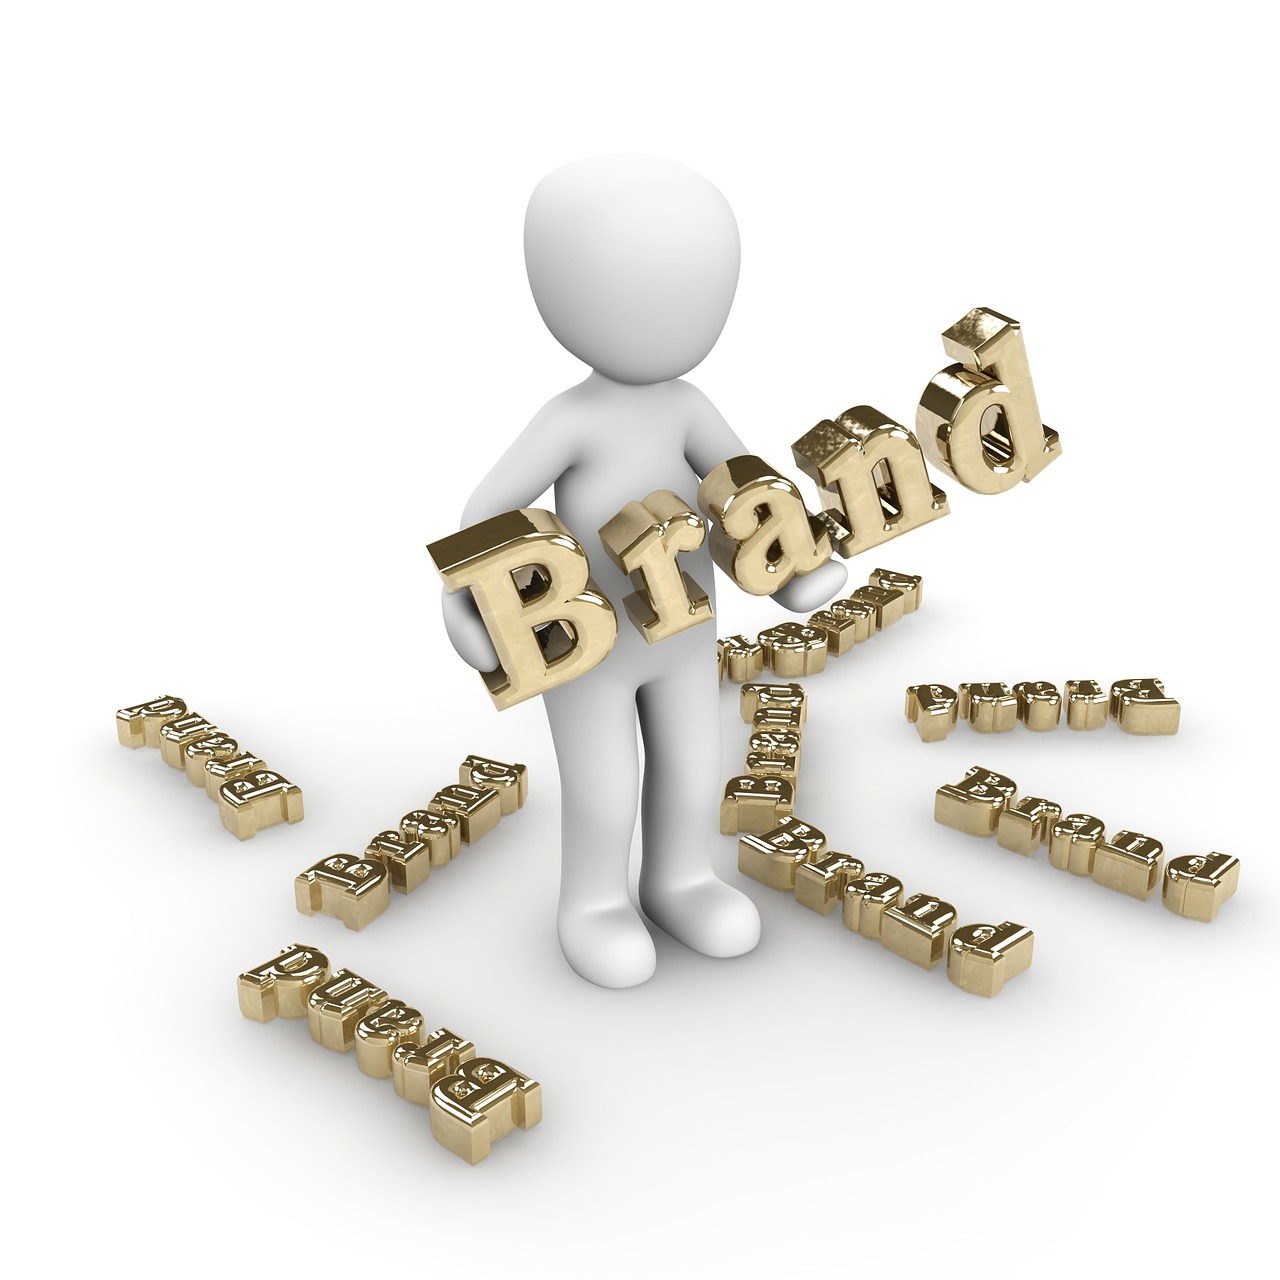 How Brand Strategy Helps Attract Leads and Grow Sales